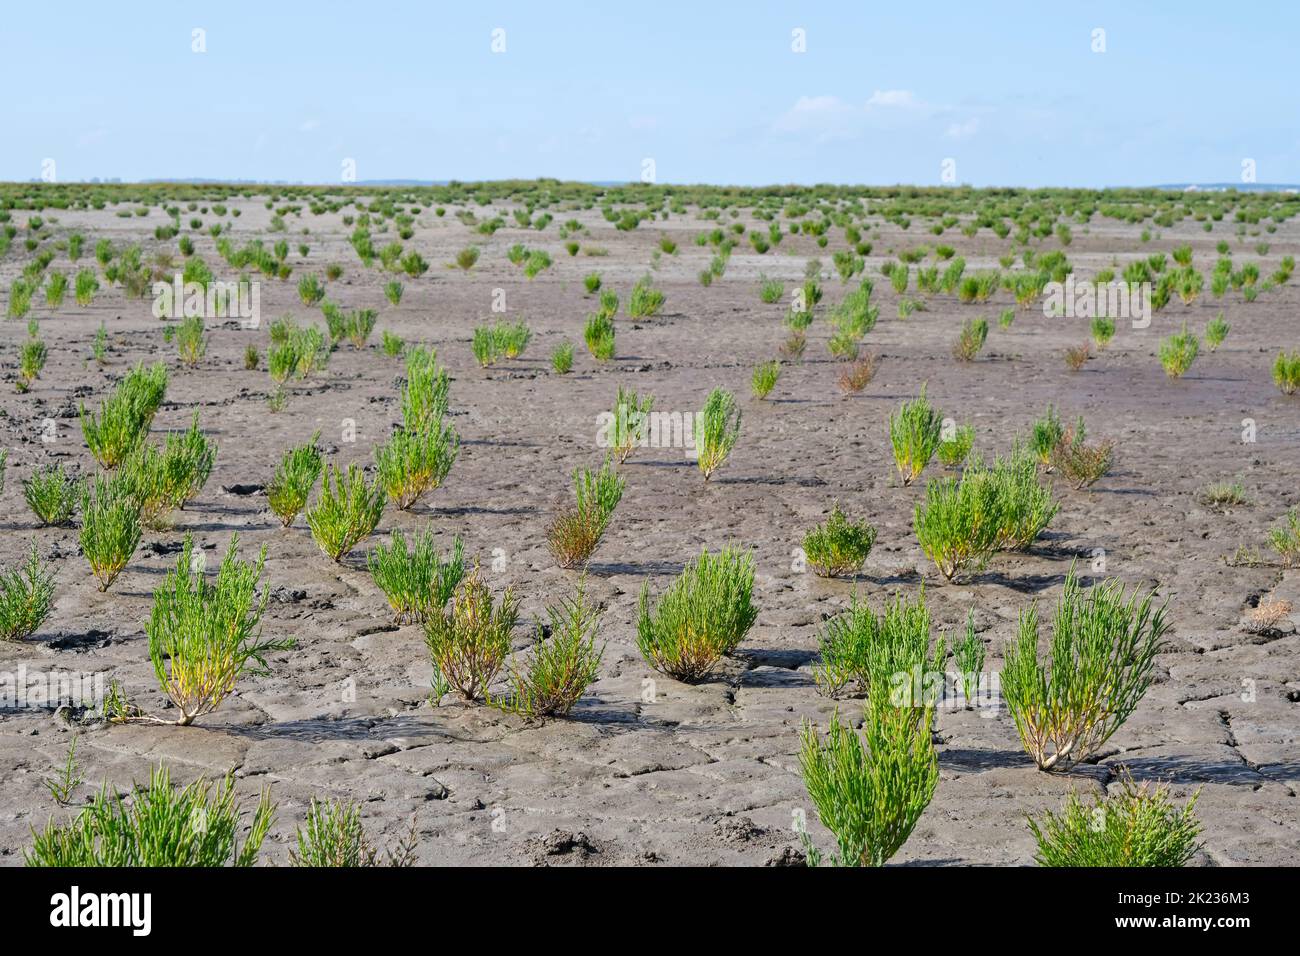 A field of green samphire or salicornia plants in cracked muddy clay at the seashore of the Wadden Sea The Netherlands at low tide under a blue sky. Stock Photo